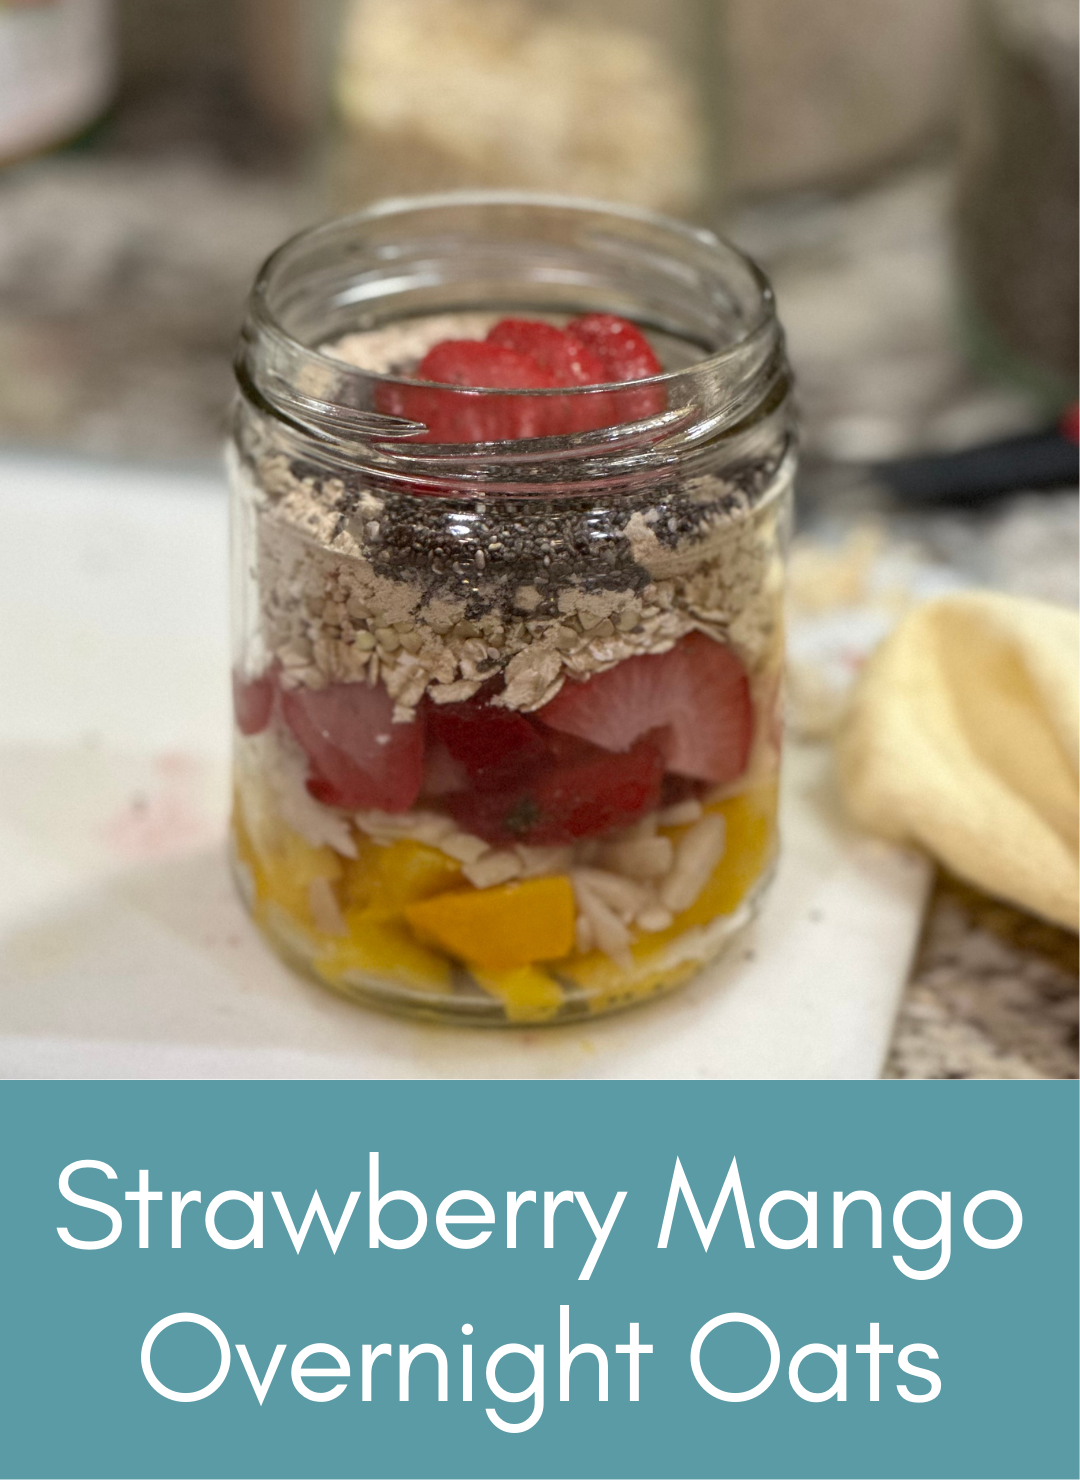 Strawberry Mango vegan overnight oats Picture with link to recipe